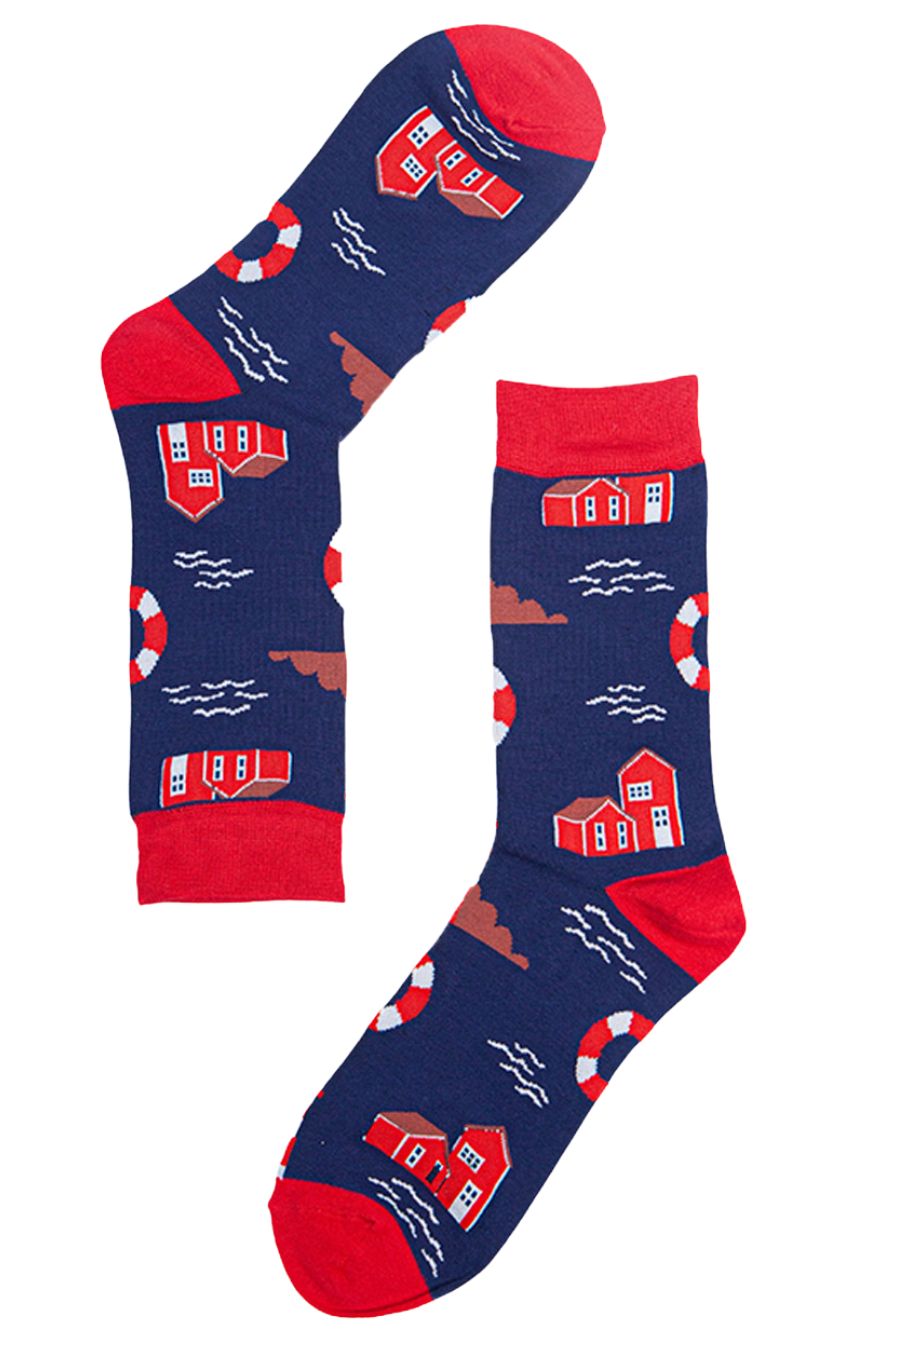 nautical themed dress socks featuring buoys and lighthouse patterns